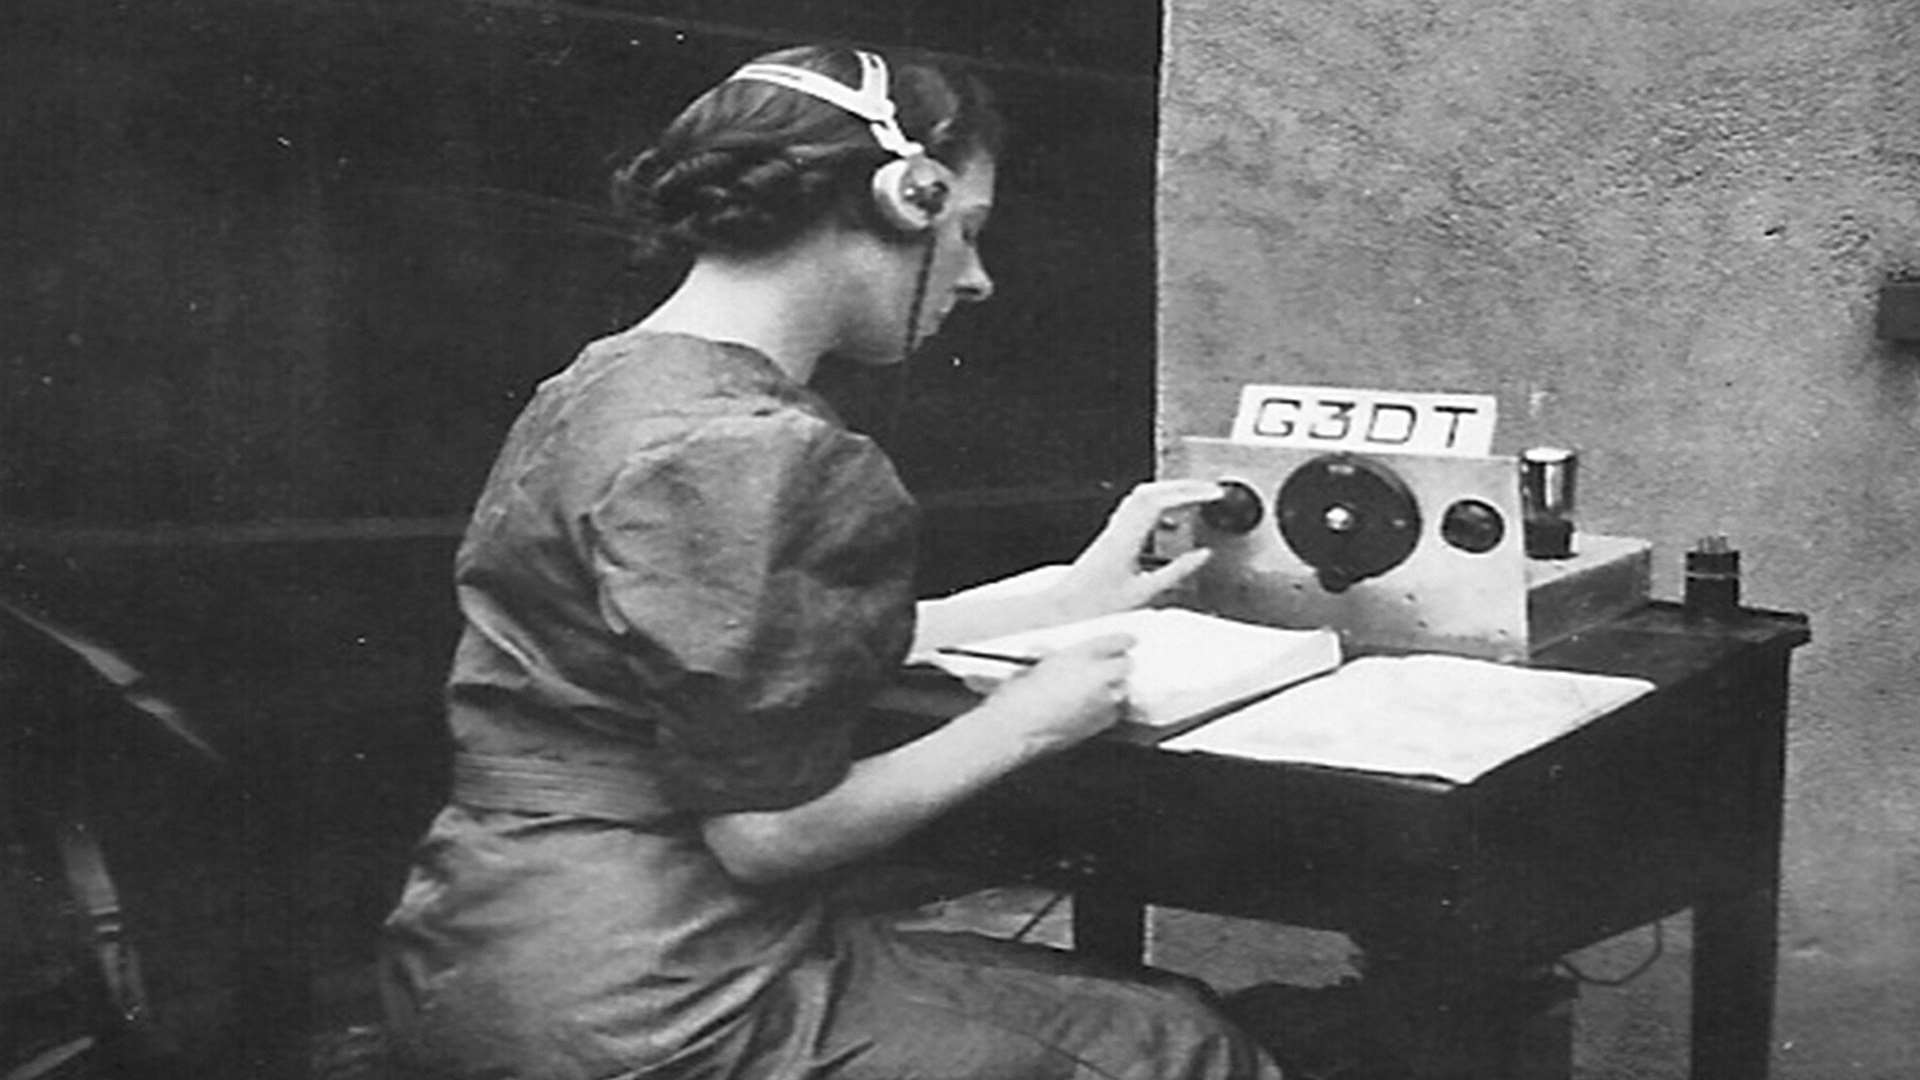 Helena intercepted German radio messages during the Second World War